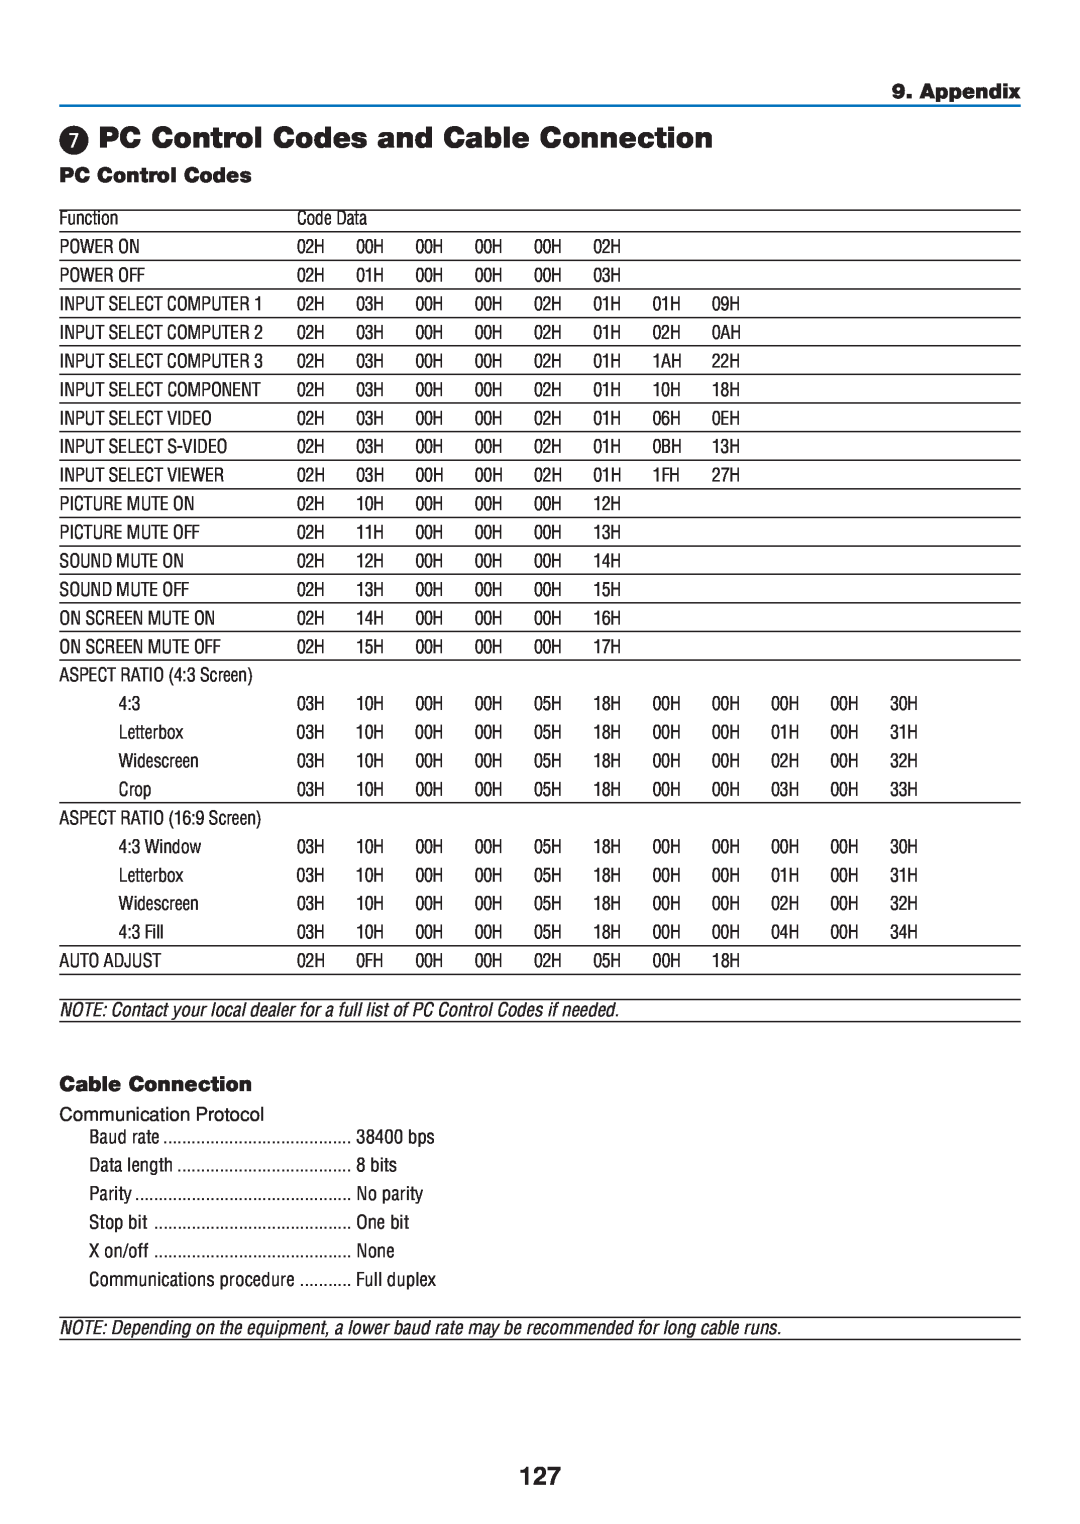 Dukane 8808 user manual PC Control Codes and Cable Connection, Appendix 